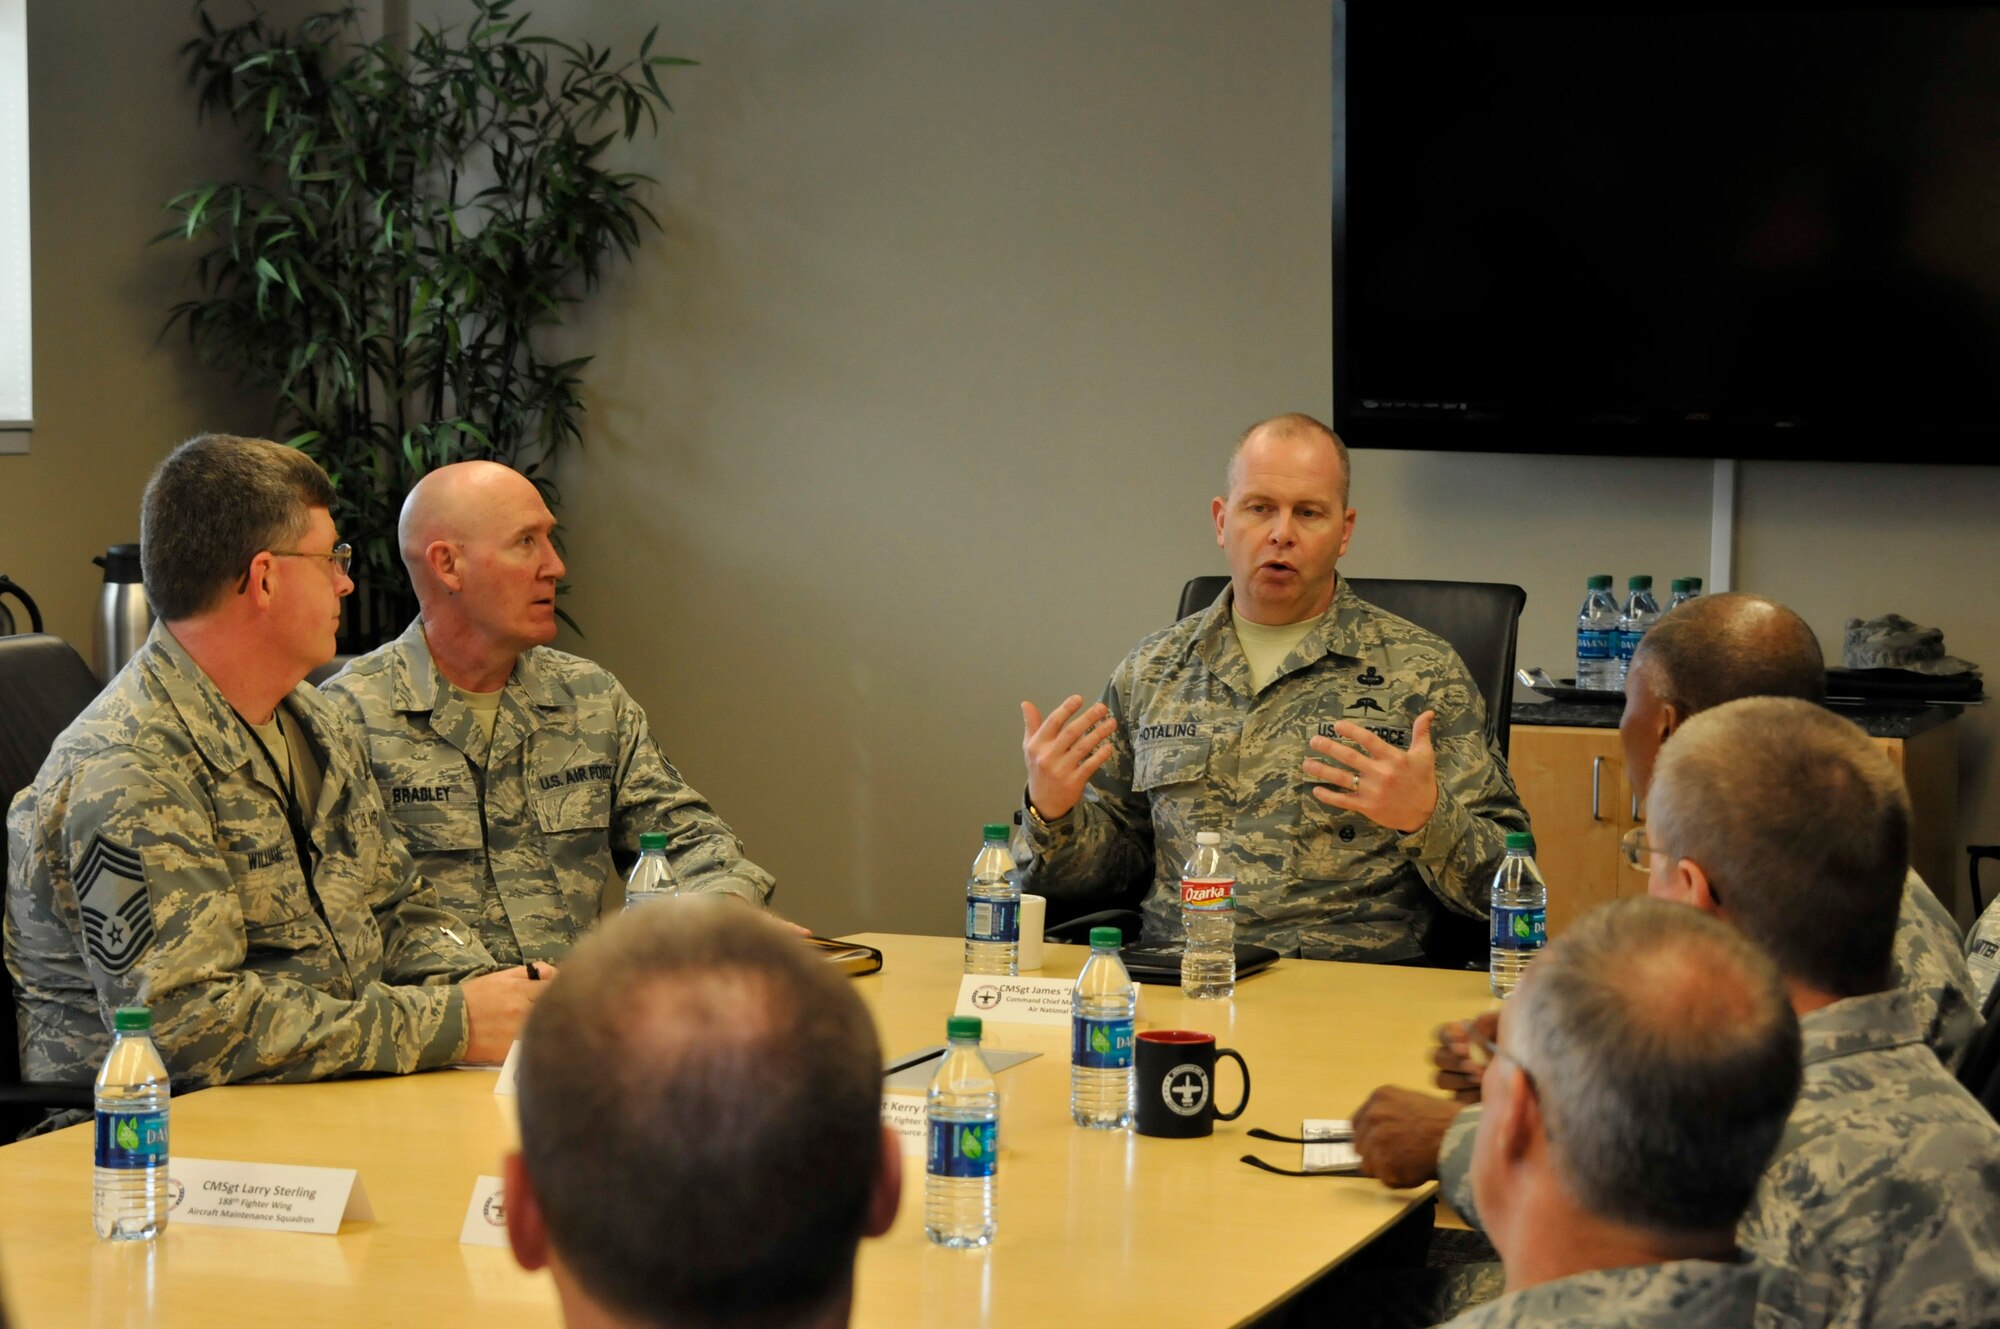 Air National Guard Command Chief Master Sgt. James W. Hotaling speaks with all of the chief master sergeants and first sergeants of the 188th Fighter Wing at Ebbing Air National Guard Base, Fort Smith, Ark., April 5, 2014. Hotaling also visited the 188th and met with Airmen and wing leadership before touring the unit’s facilities. (U.S. Air National Guard photo by Airman 1st Class Cody Martin/Released)